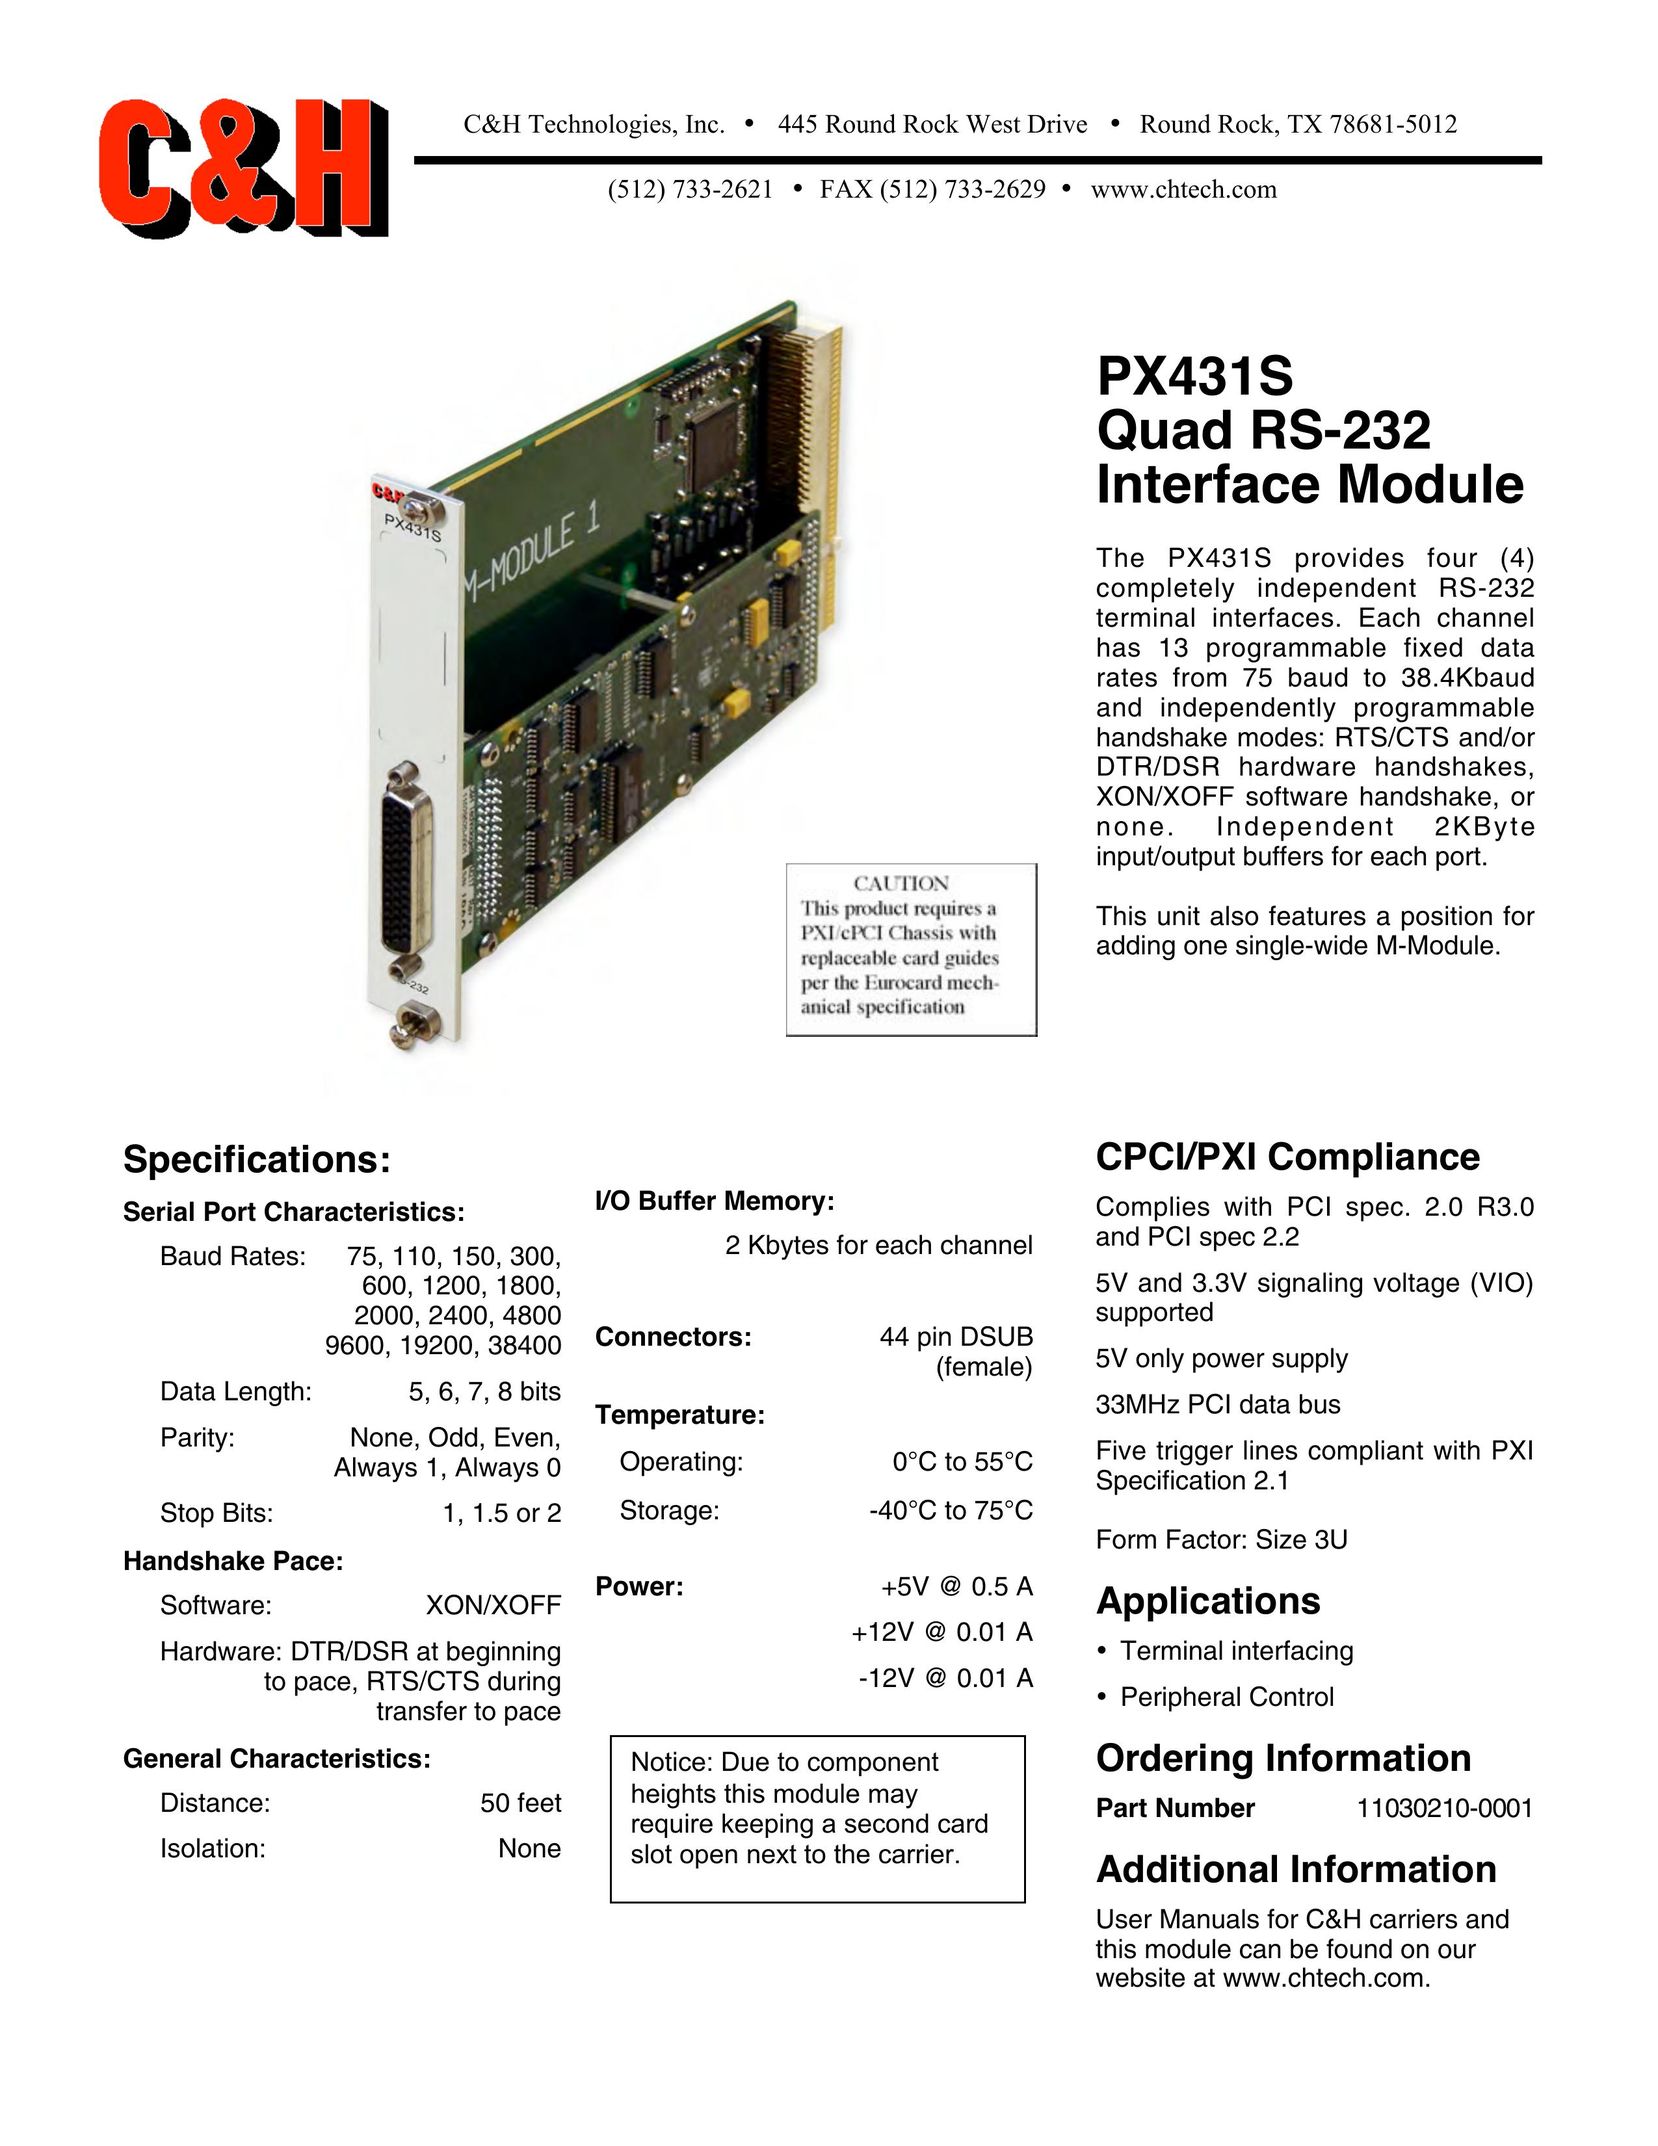 CH Tech PX431S Network Card User Manual